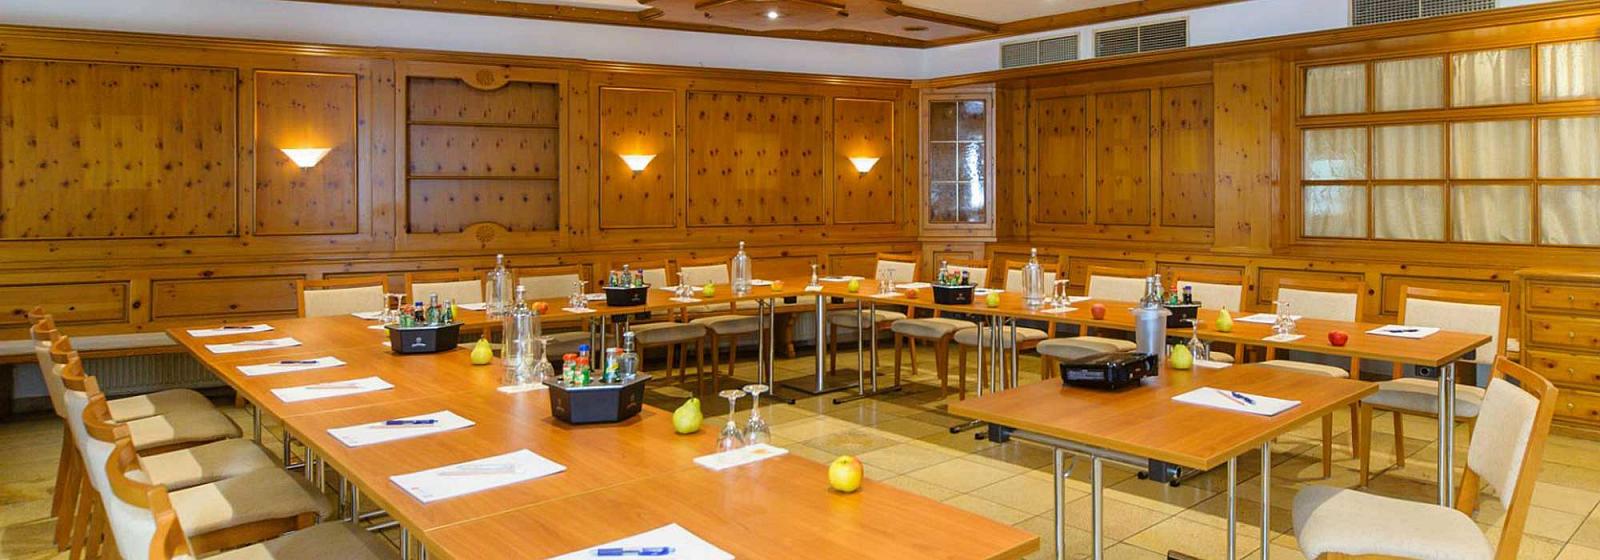 Akzent-Hotel Goldner Stern: Additional Conference Rooms